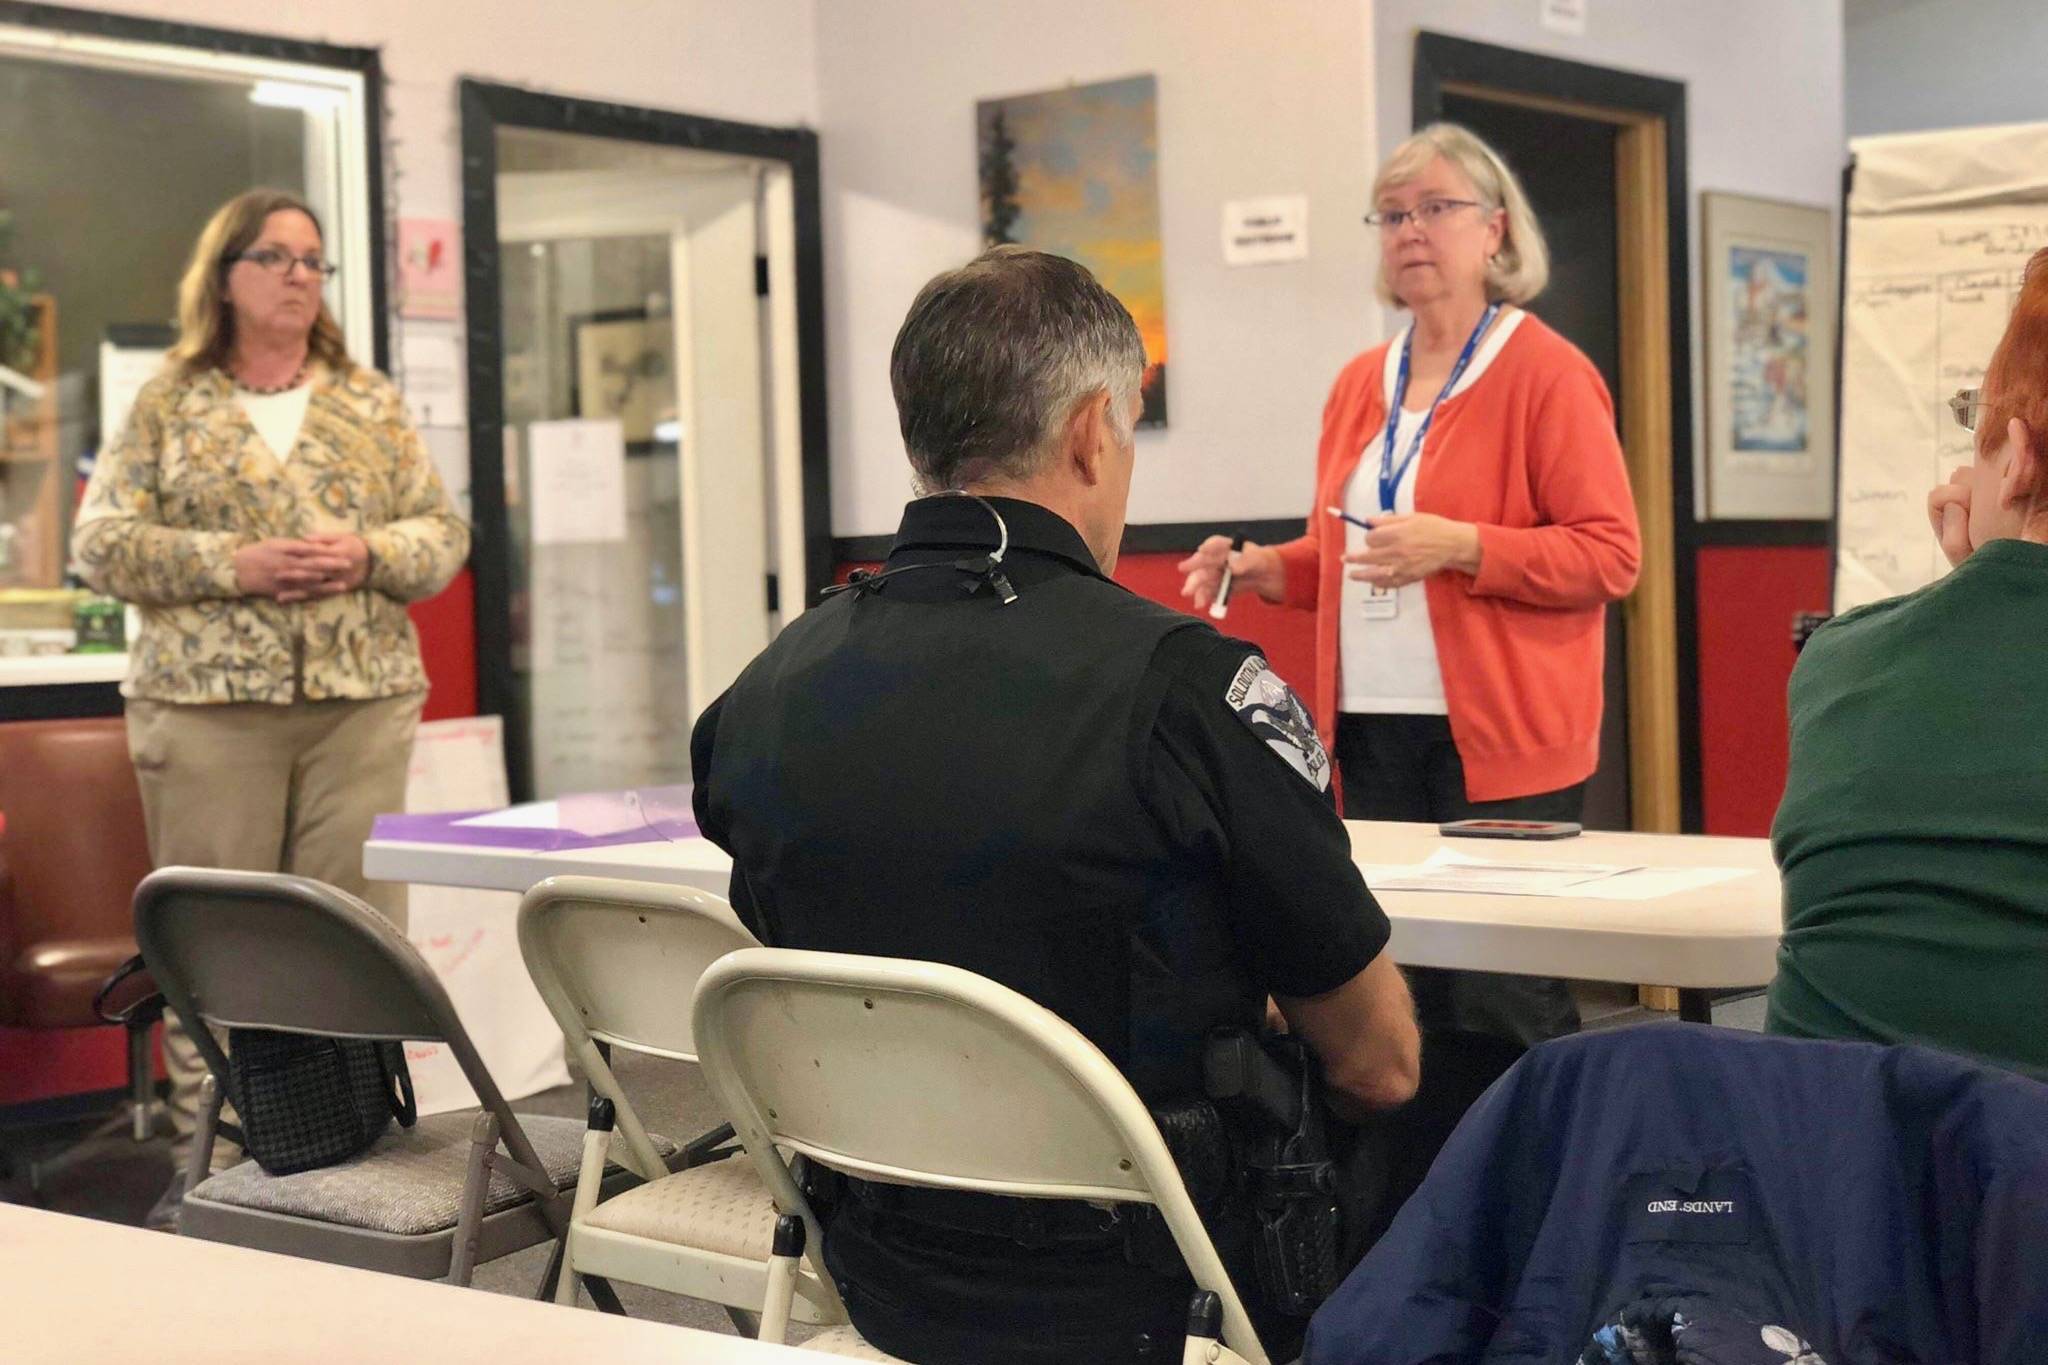 Leslie Rohr and Kathy Gensel lead a meeting on homelessness in the community on Thursday, Sept. 27, 2018, near Soldotna, Alaska. (Photo by Victoria Petersen/Peninsula Clarion)